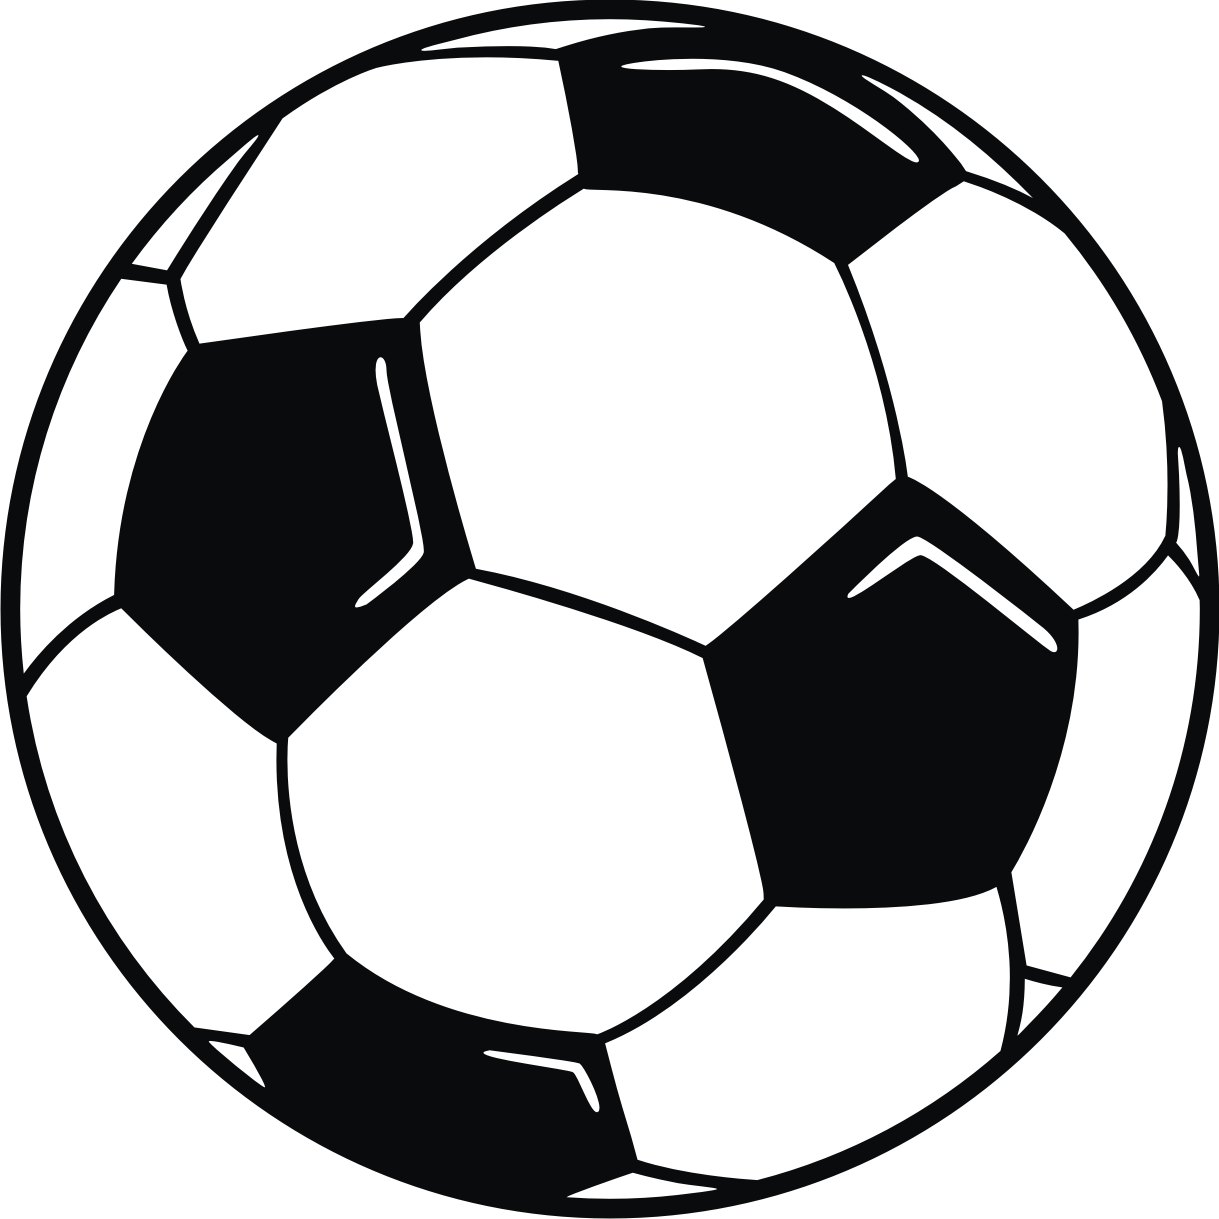 Soccer ball clip art free large images 5